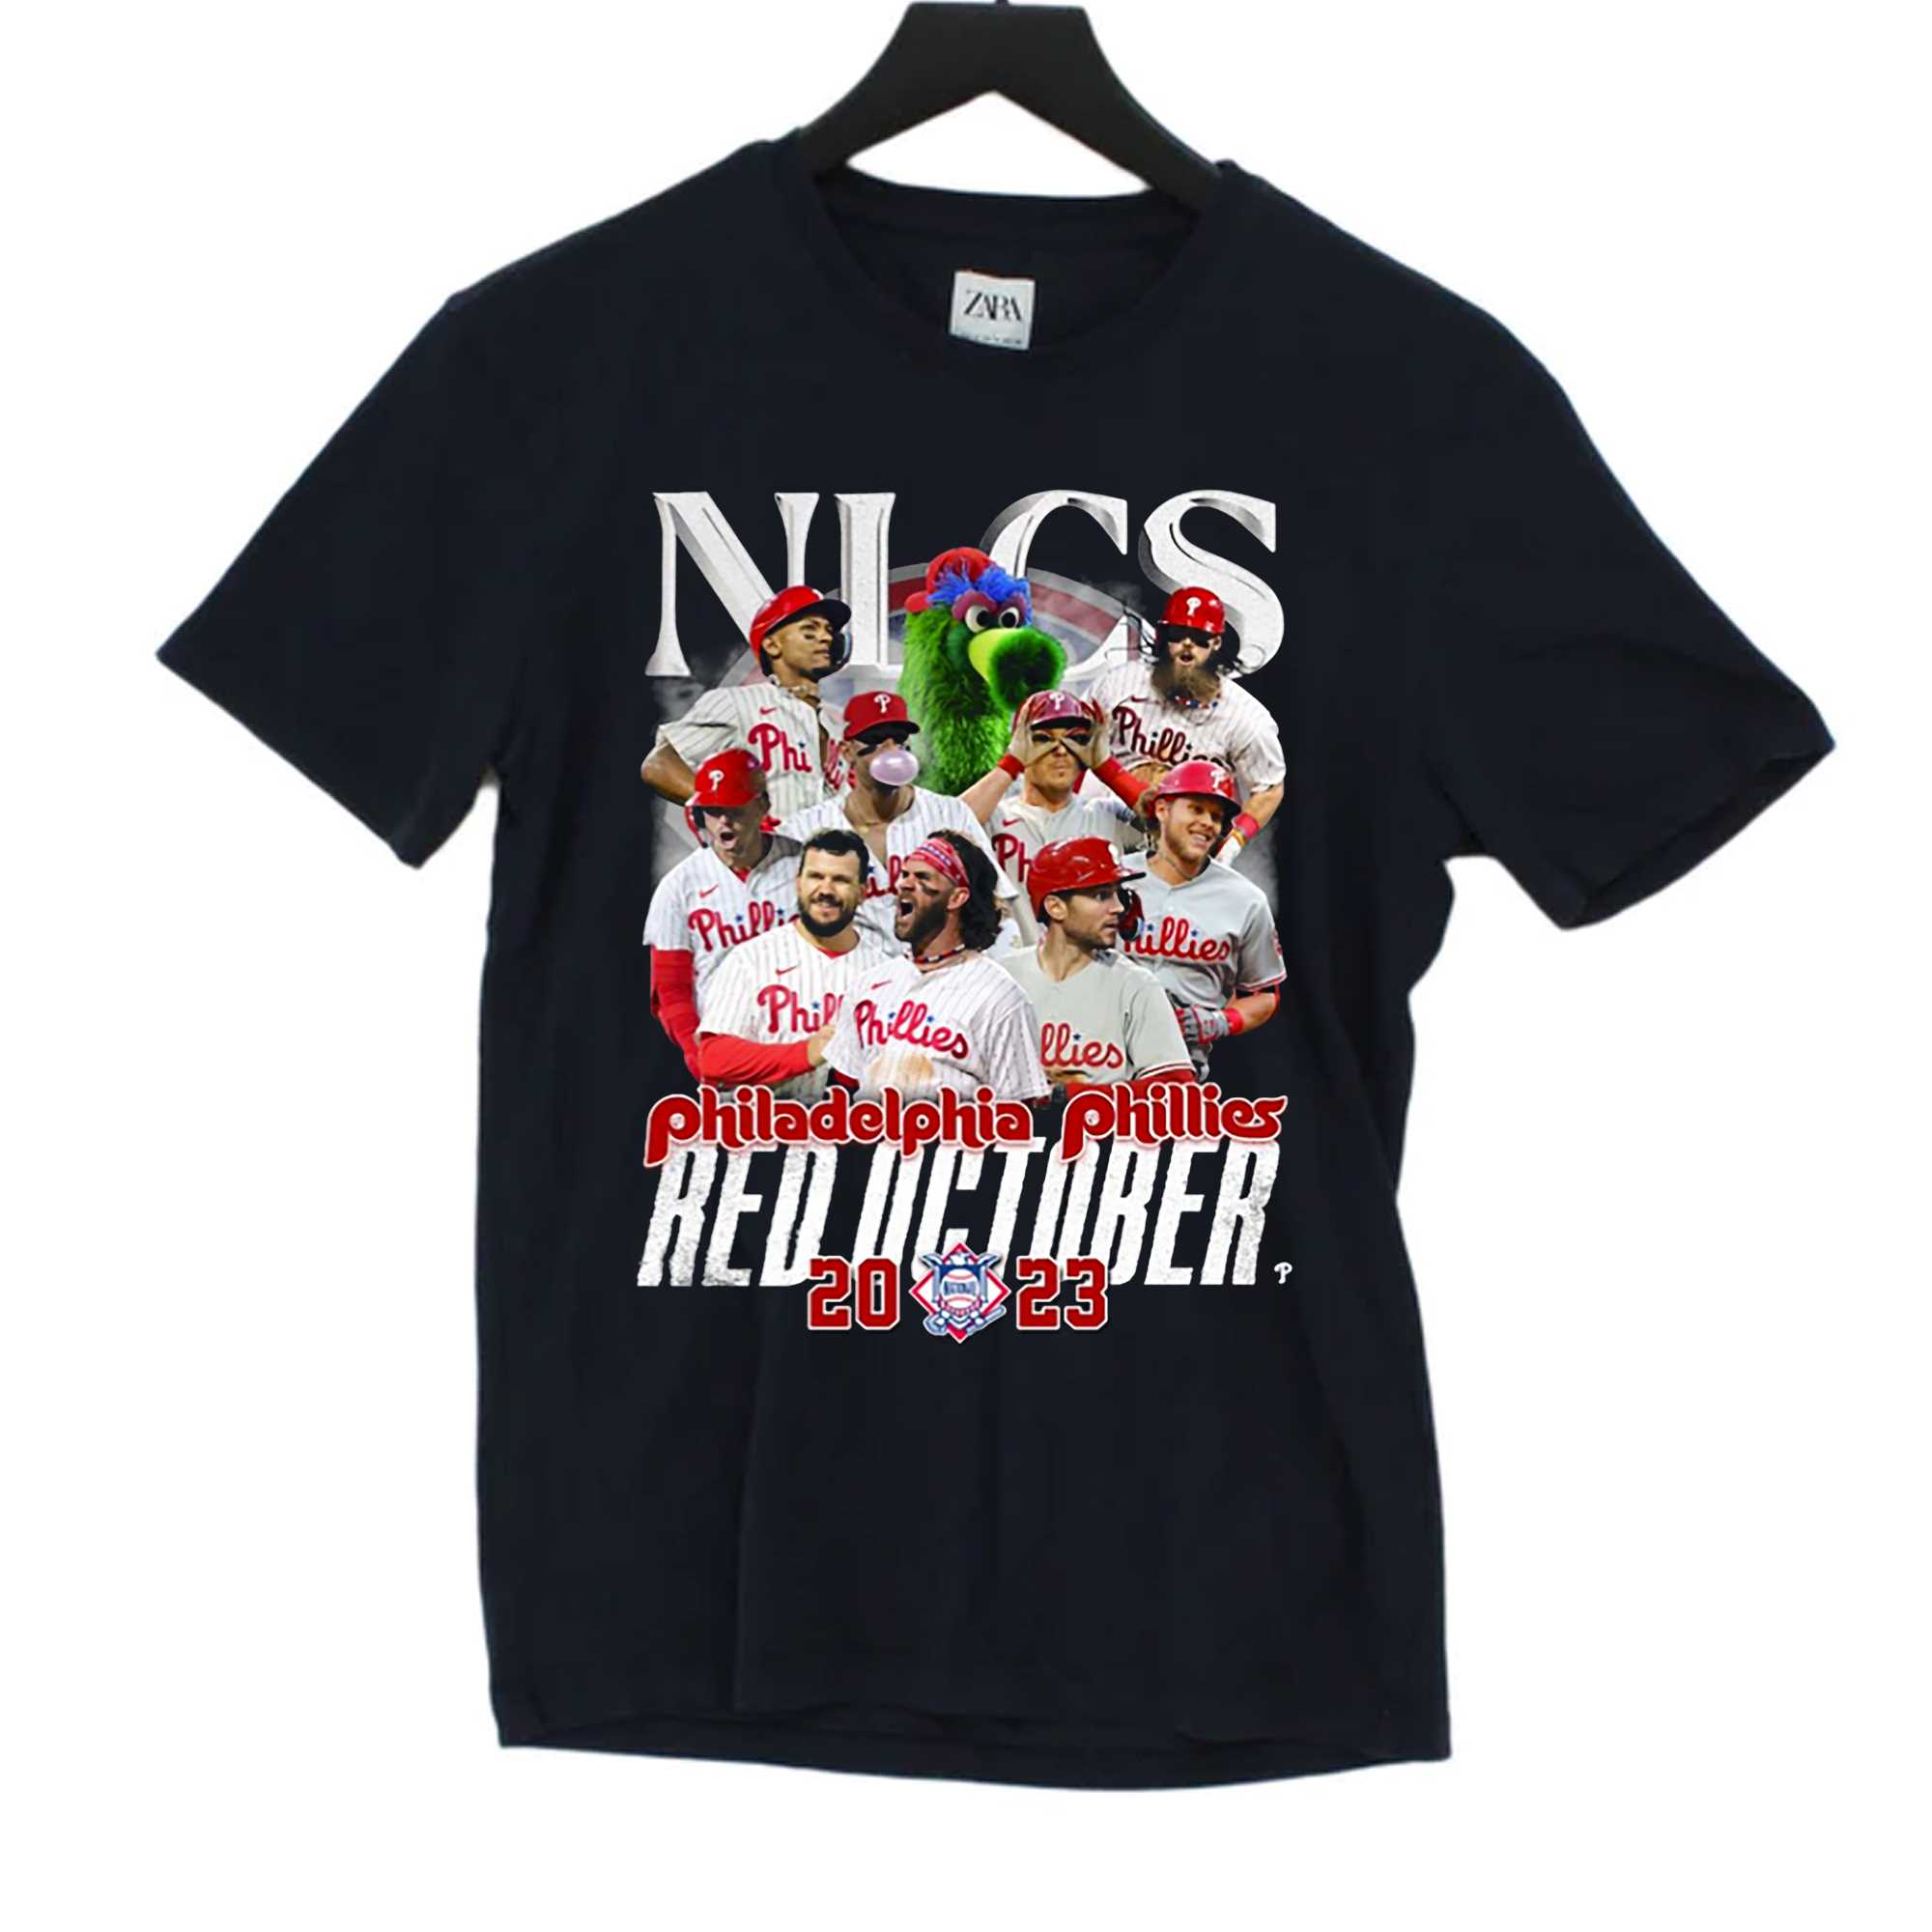 Nlcs Red October 2023 Philadelphia Phillies T-Shirt, hoodie, sweater, long  sleeve and tank top